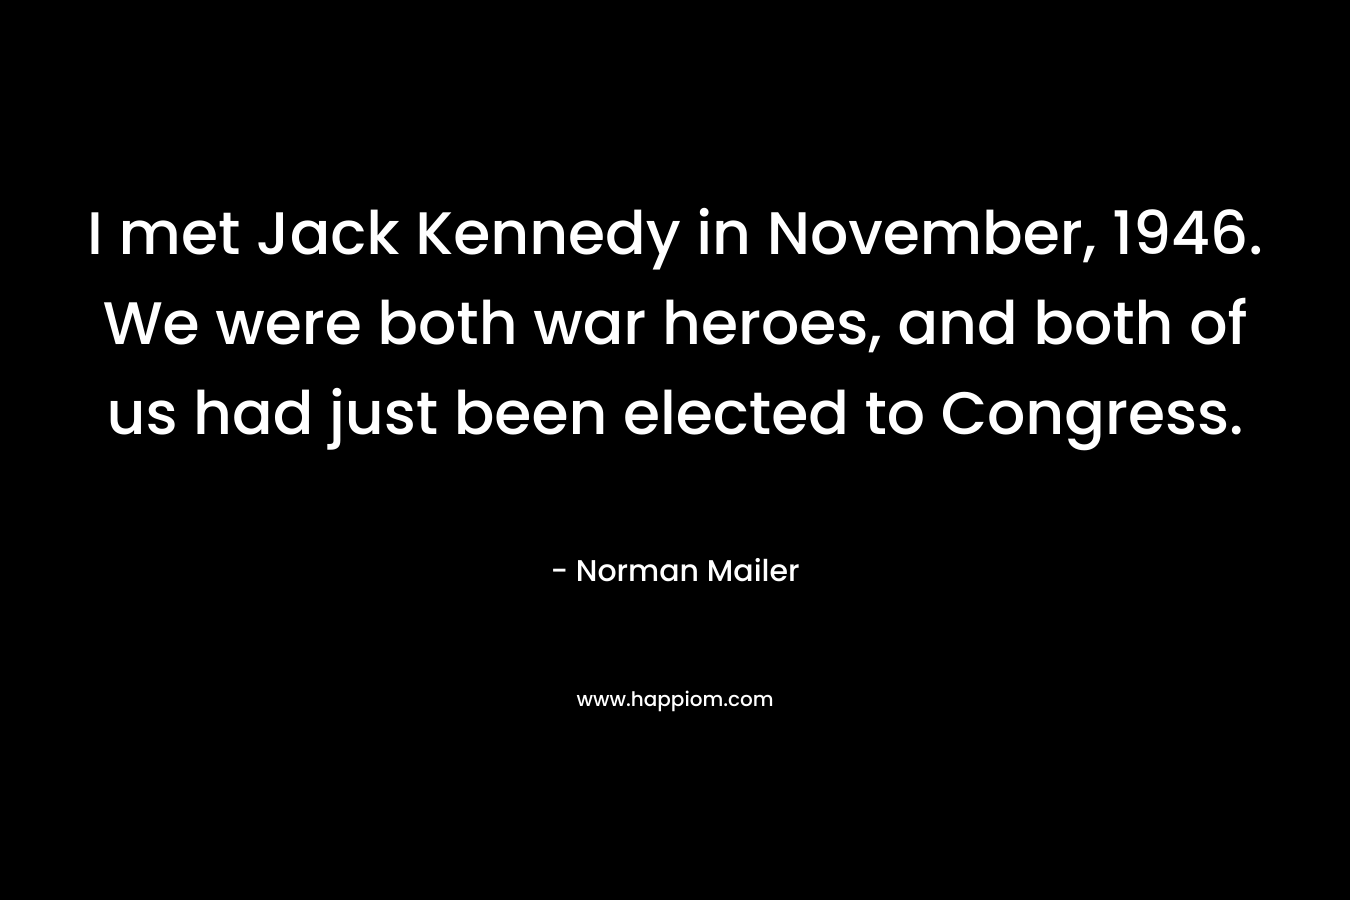 I met Jack Kennedy in November, 1946. We were both war heroes, and both of us had just been elected to Congress.